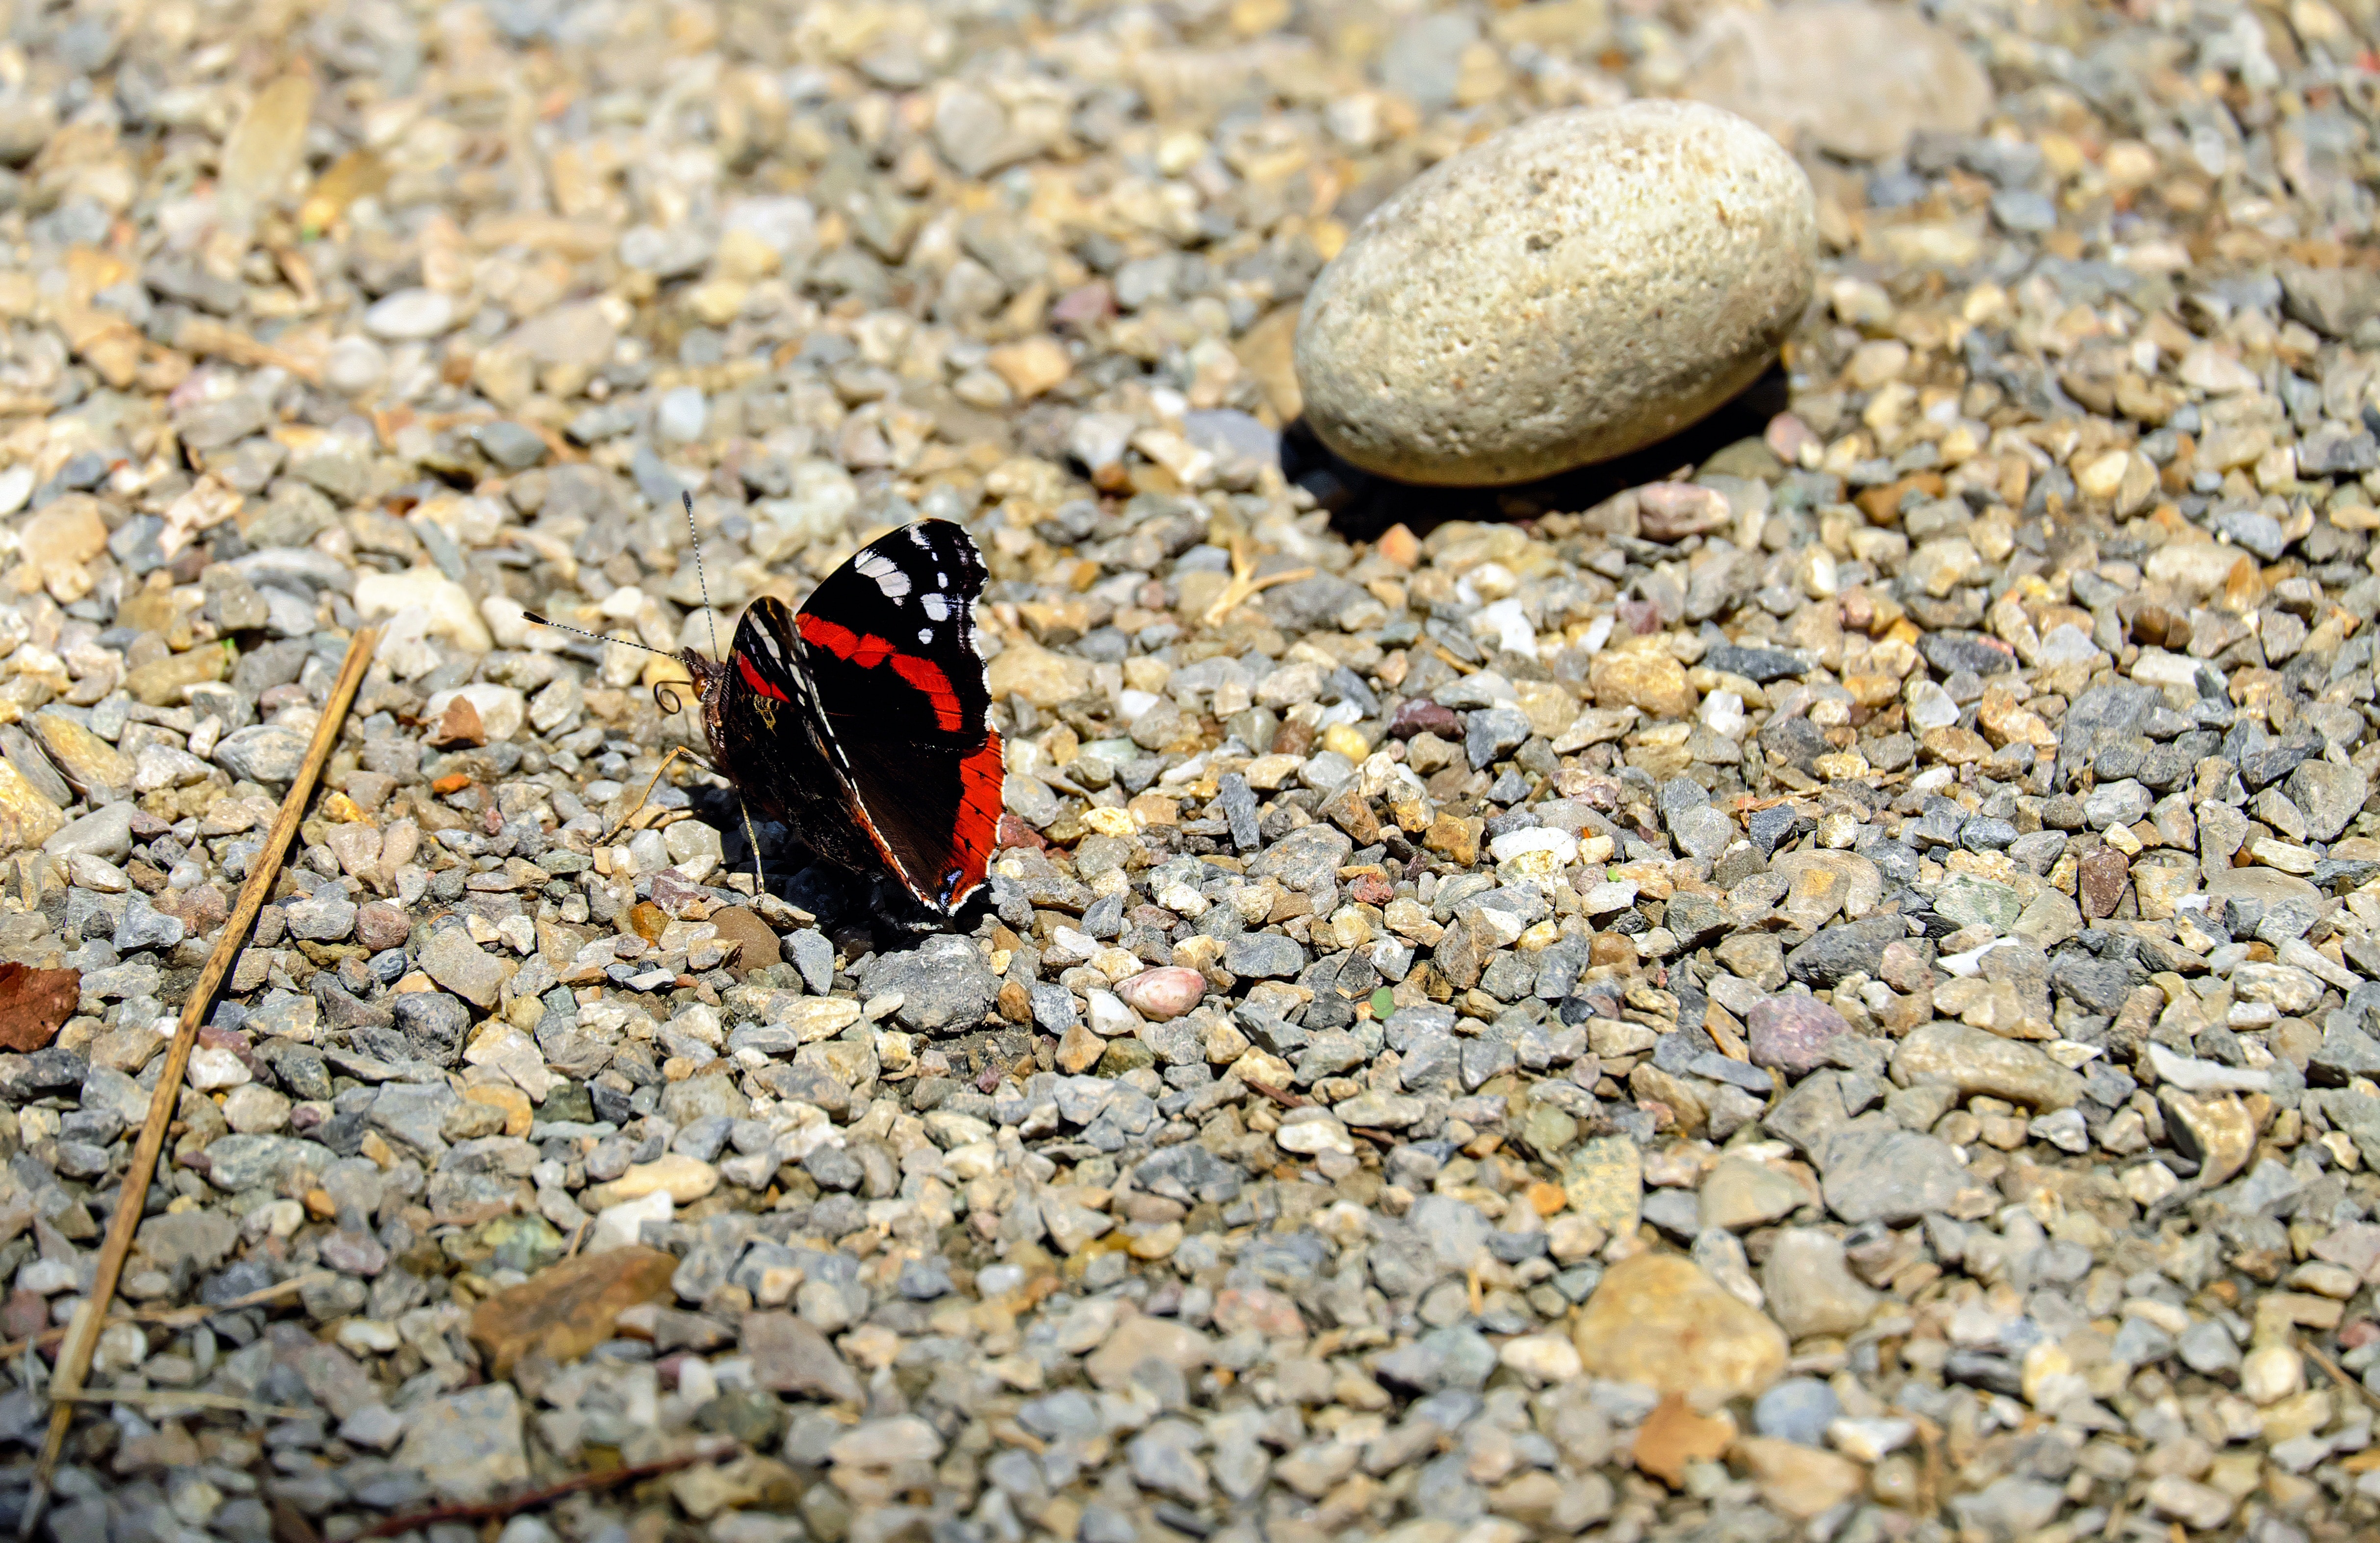 Butterfly, Insect, Stones, Nature, animal themes, animals in the wild